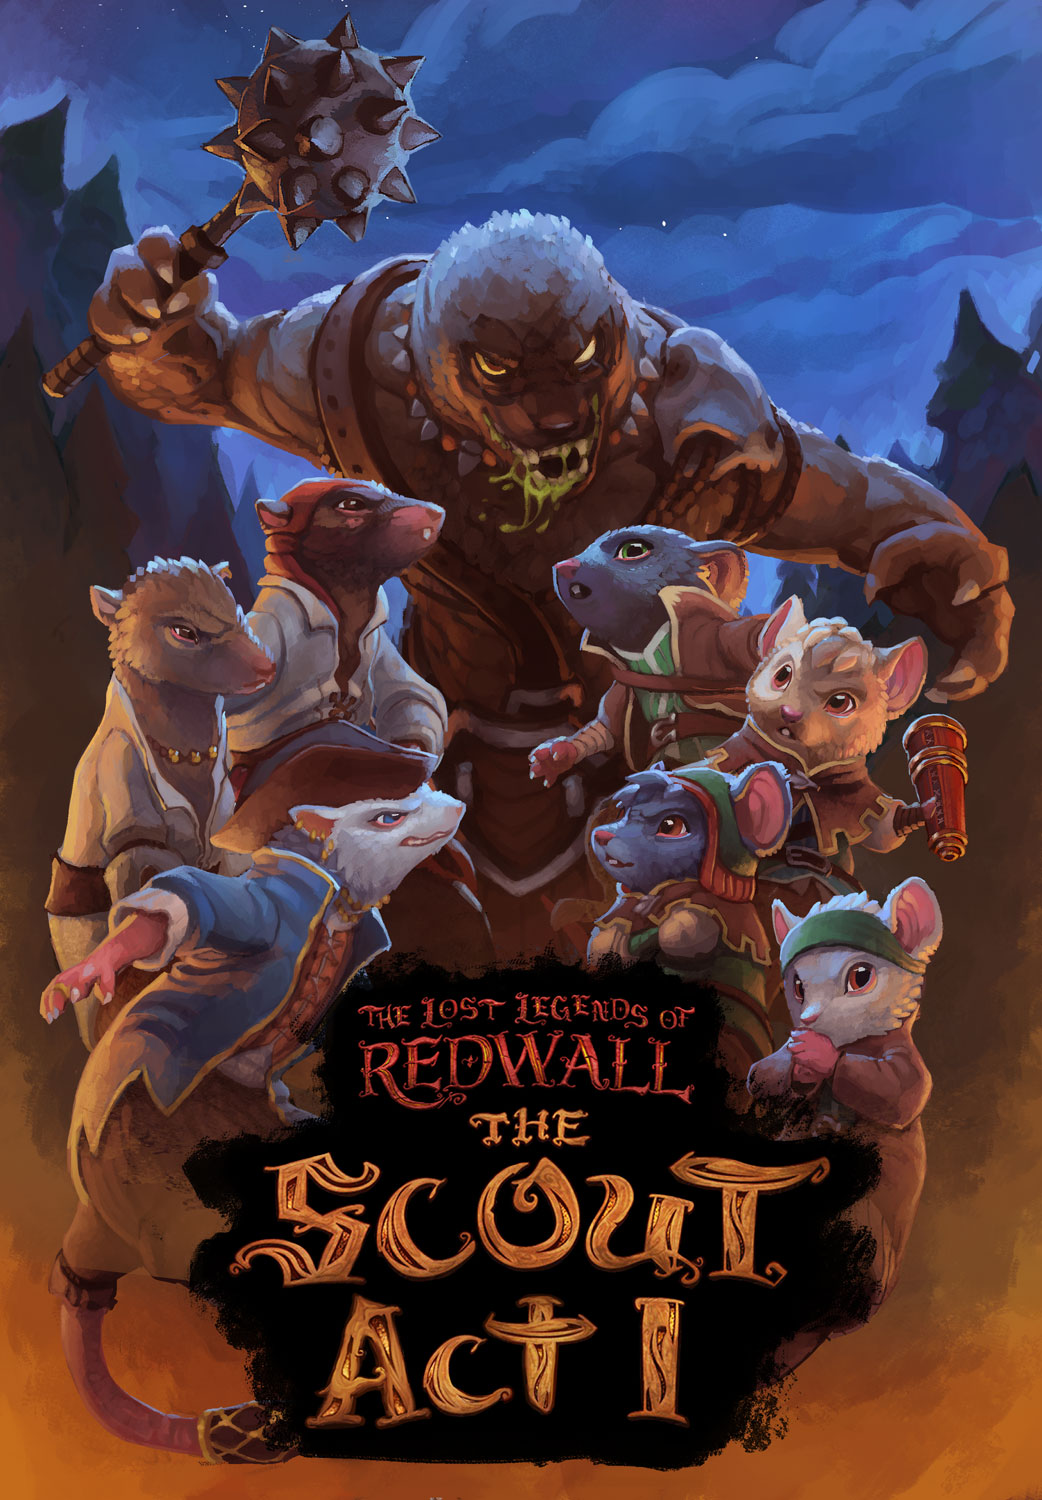 The lost legends of redwall. The Lost Legends of Redwall : the Scout. Рэдволл игра на ПК. The Lost Legends of Redwall the Scout Act 3.